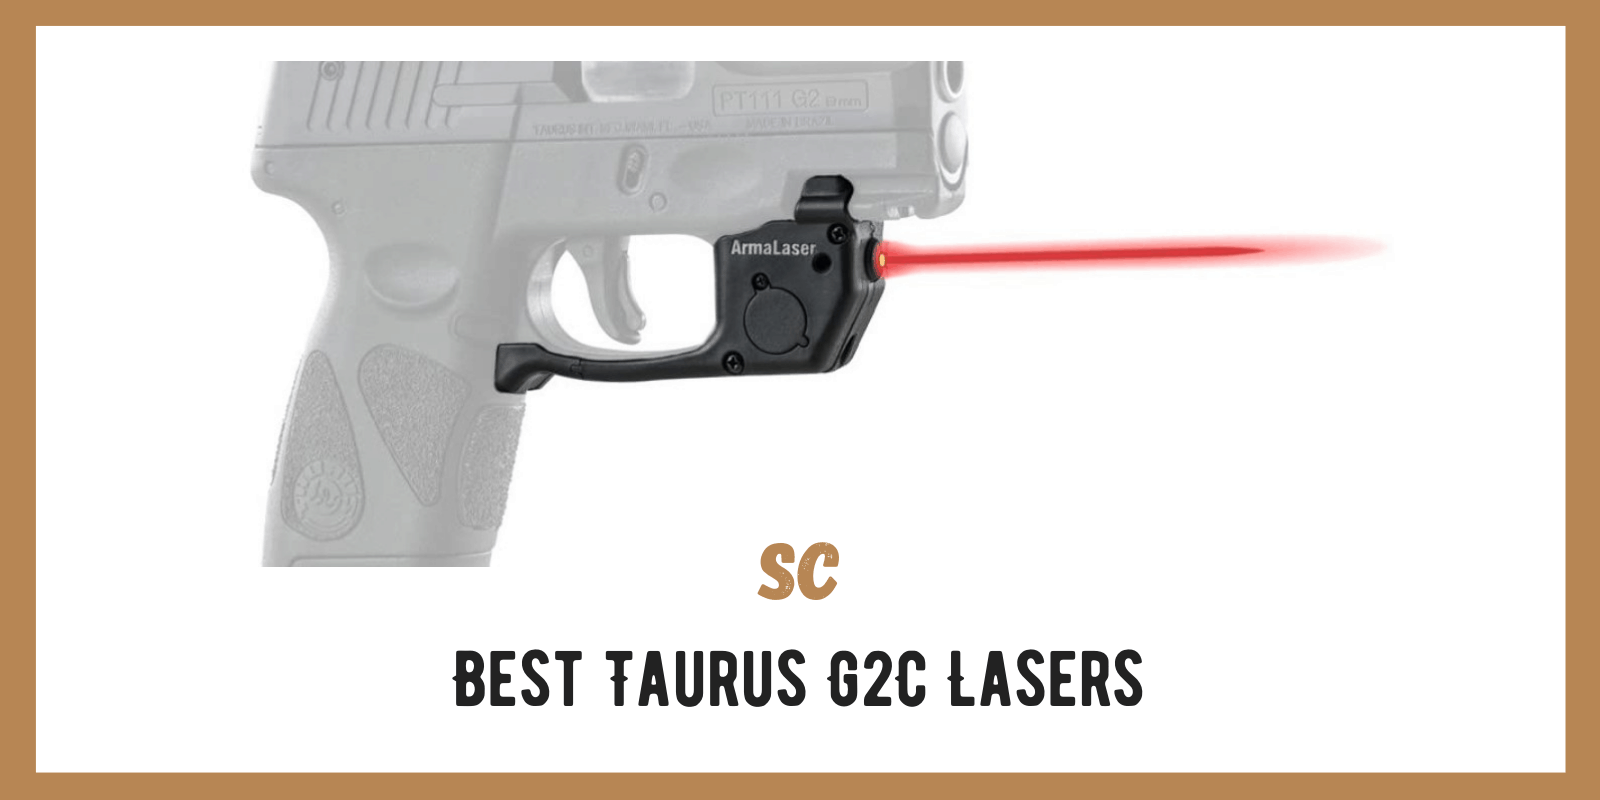 Best Taurus G2C Lasers in 2022: Experts Review